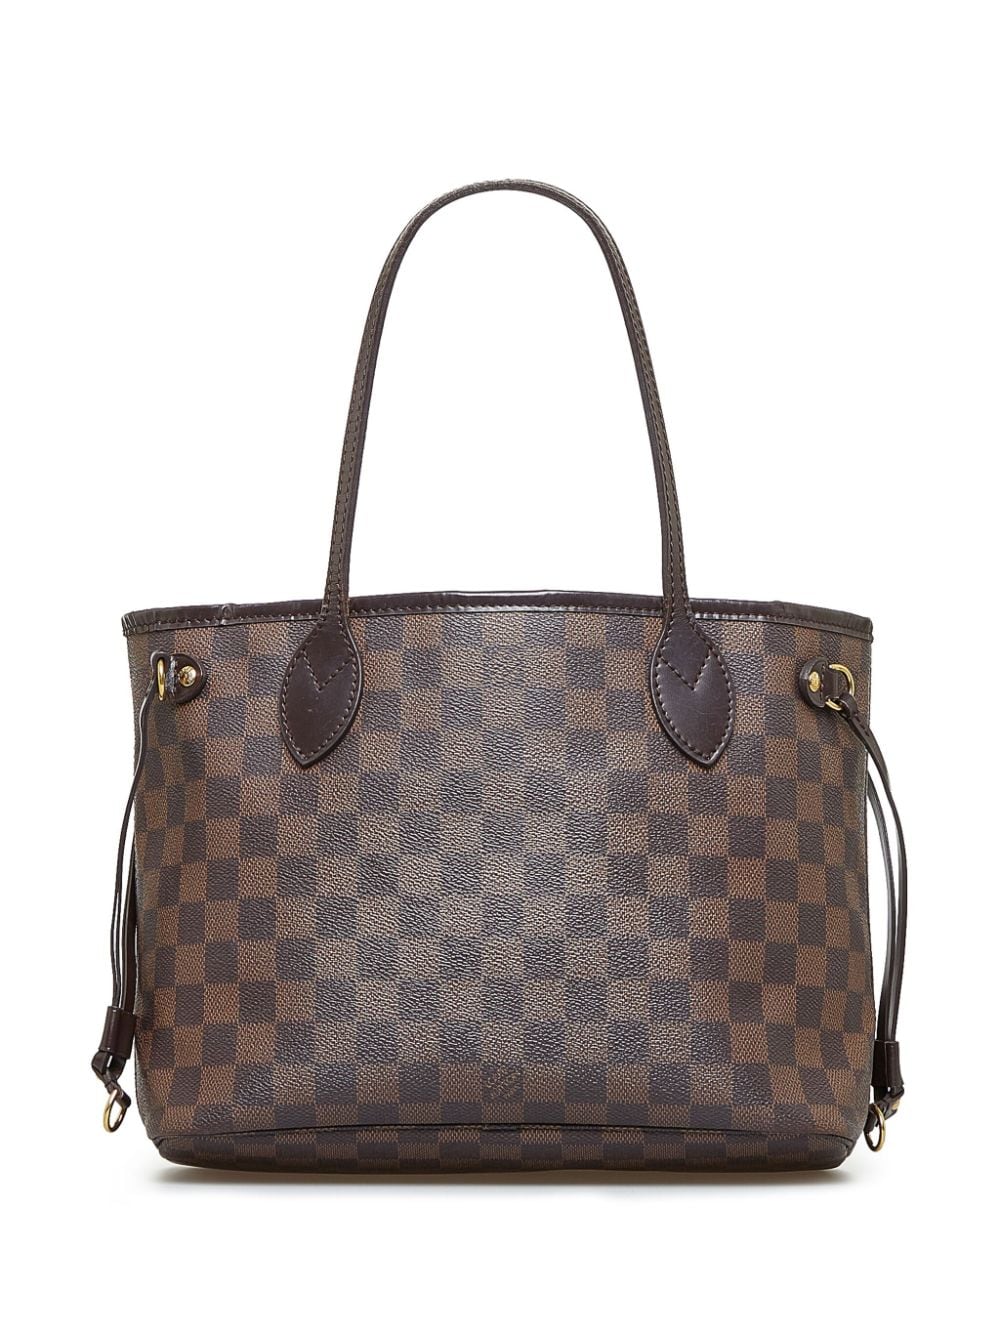 Louis Vuitton 2011 pre-owned Neverfull PM totee bag - Bruin